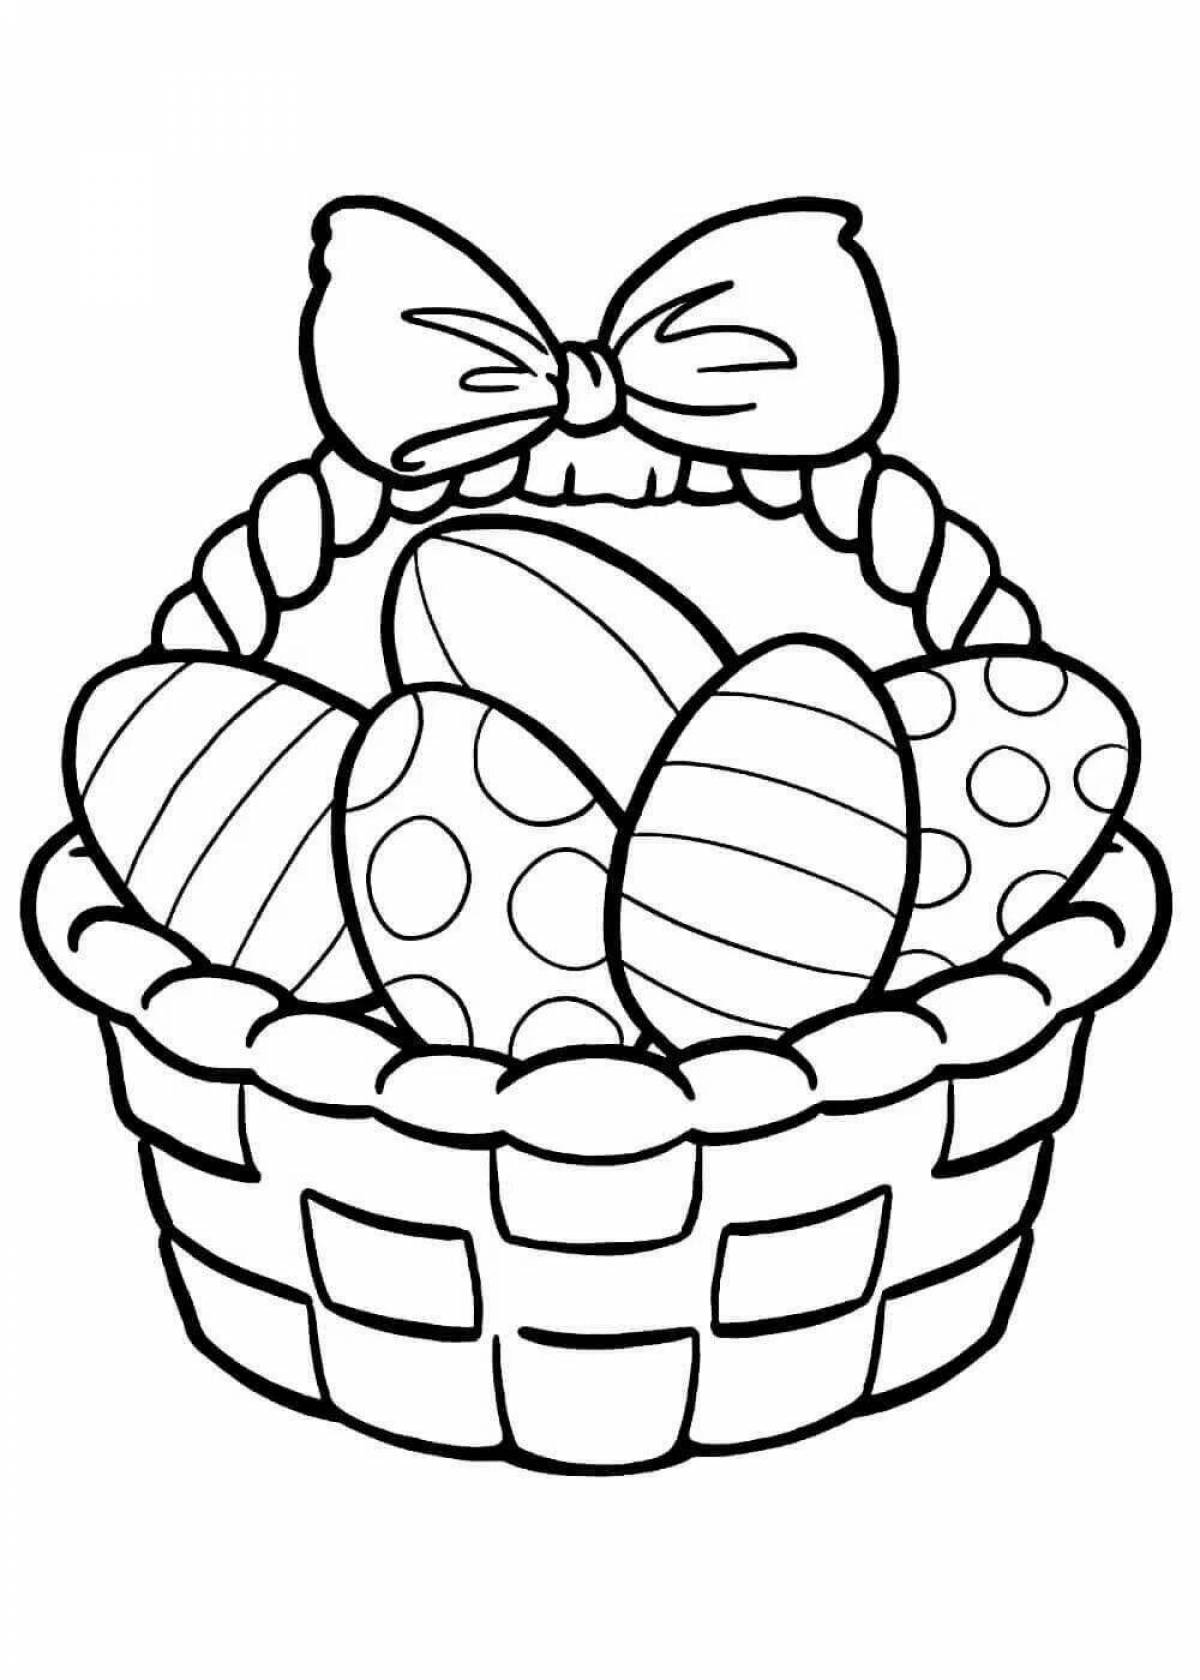 Tempting Easter symbols coloring pages